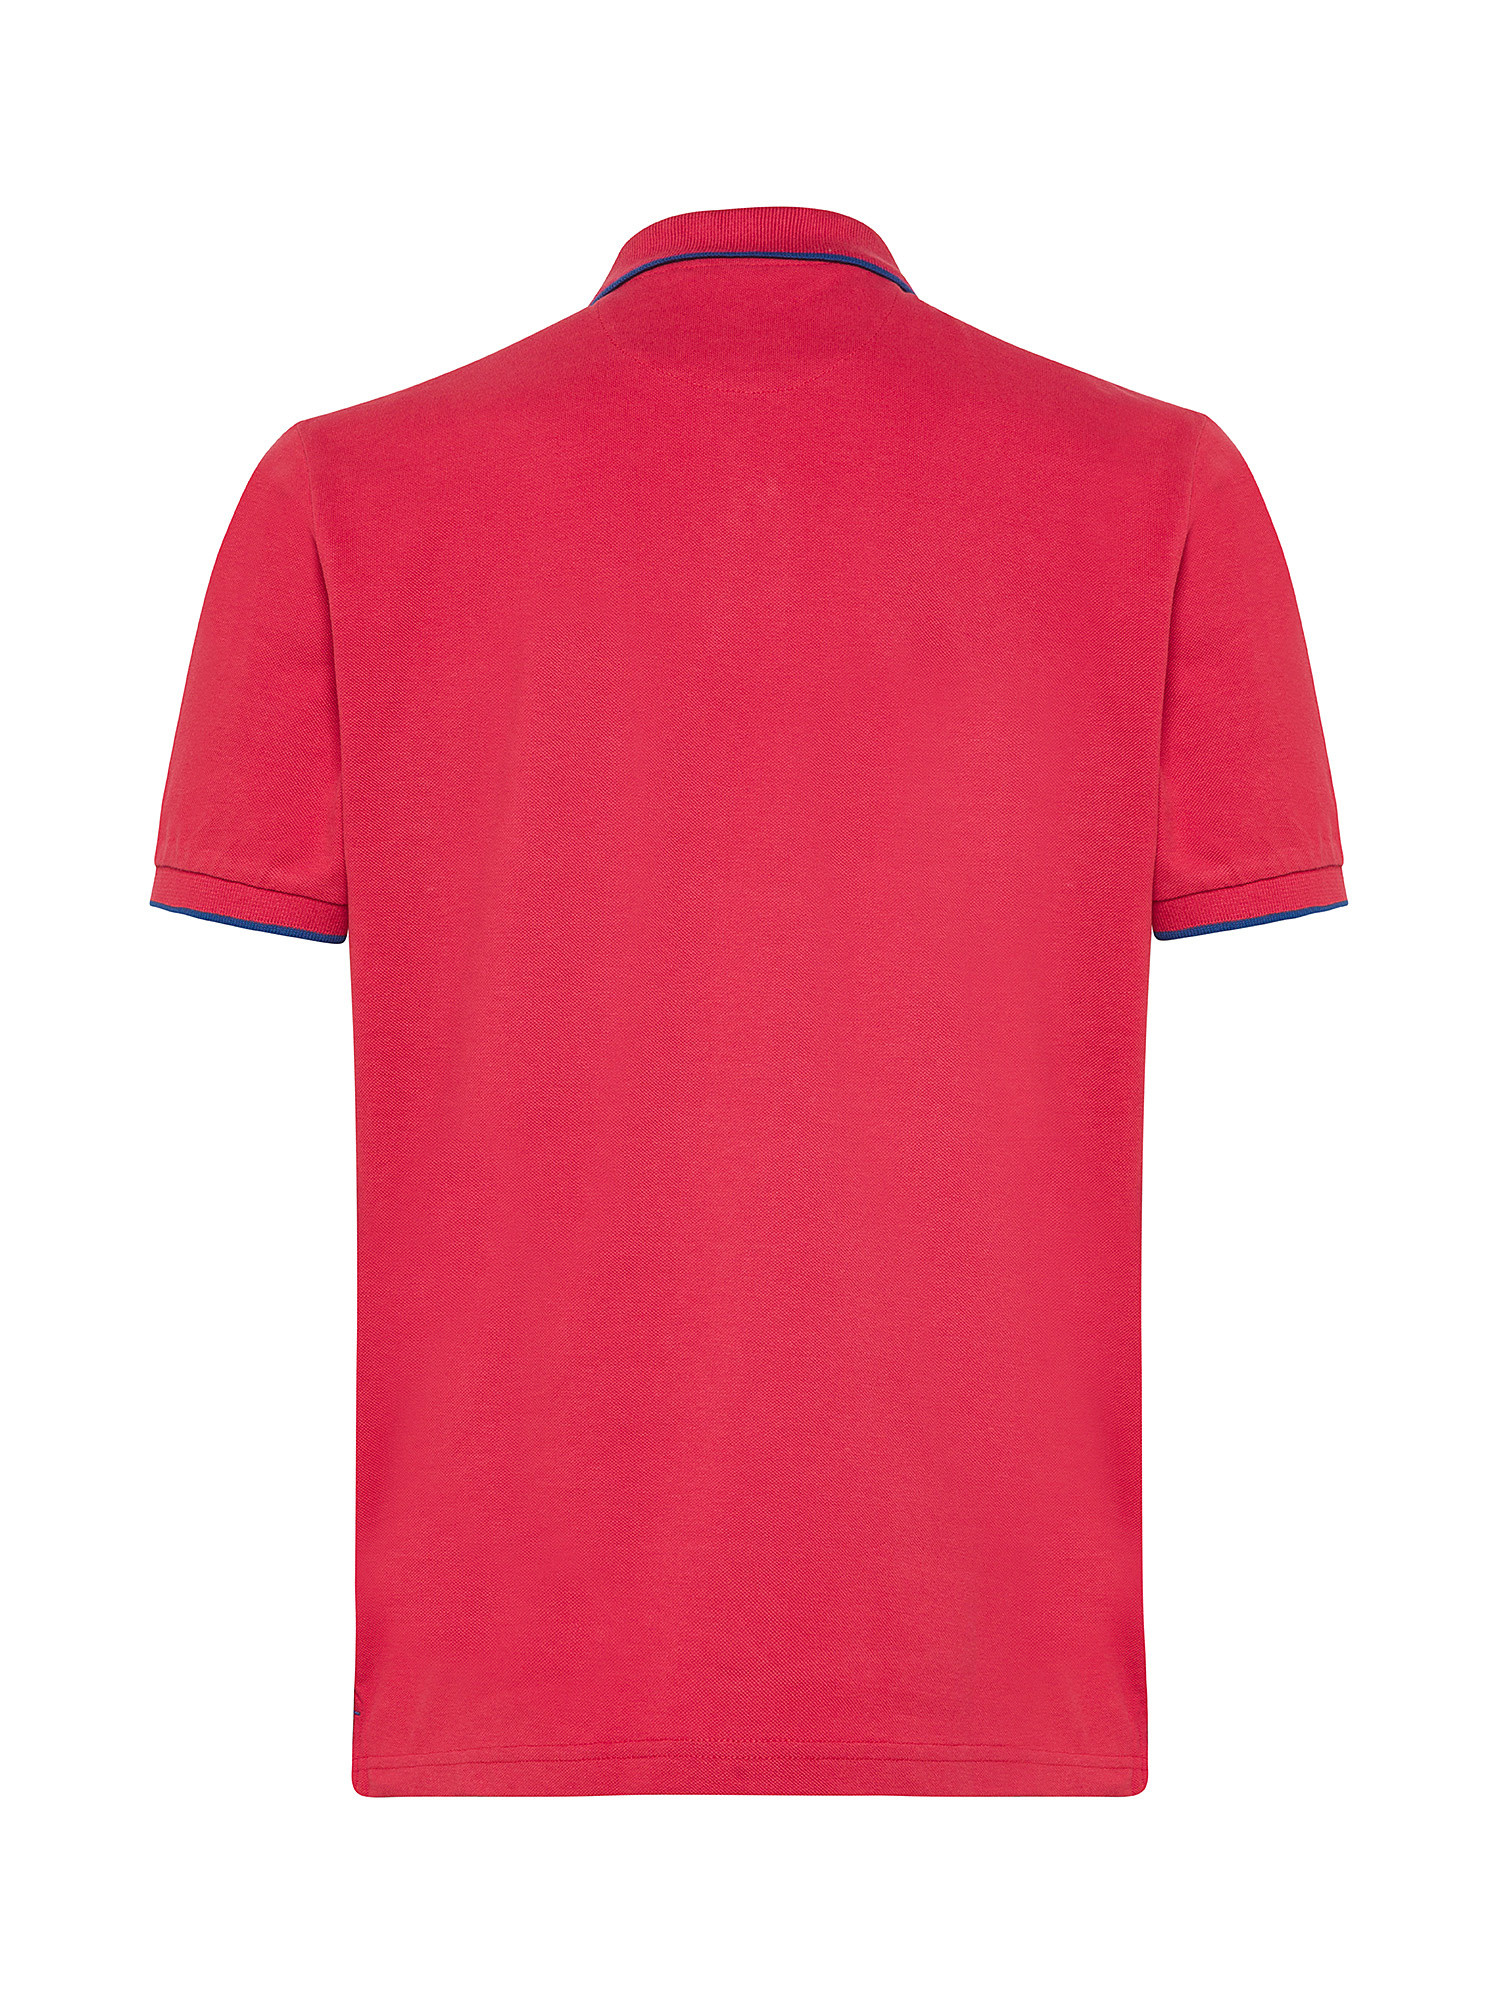 North Sails - Organic cotton piqué polo shirt with micrologo, Red, large image number 1